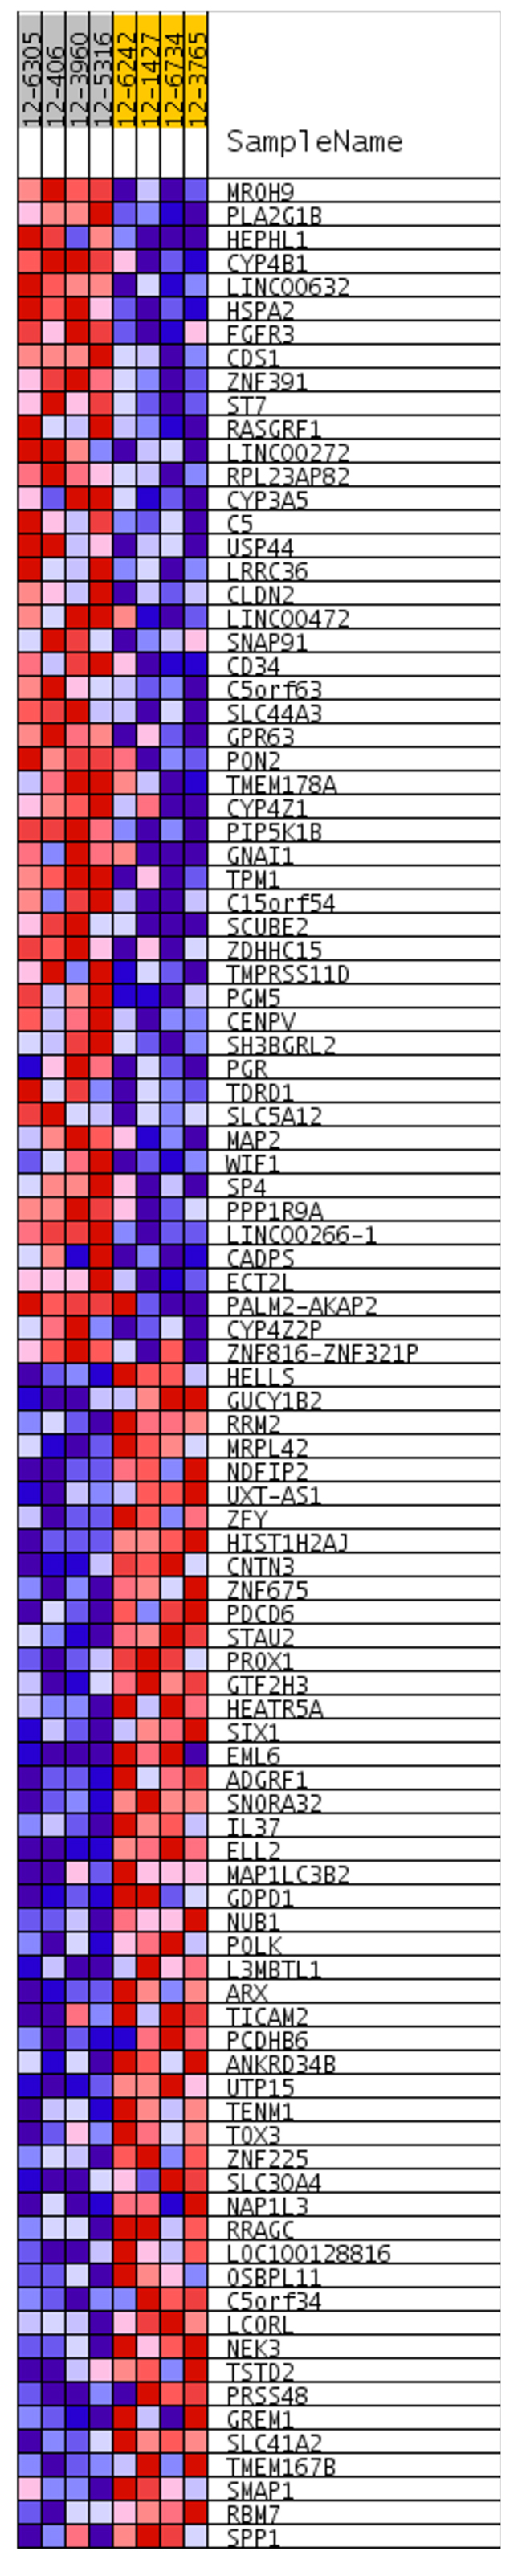 Heatmap shows top 50 differentially expressed genes between acinar and solid subtypes of lung AC.